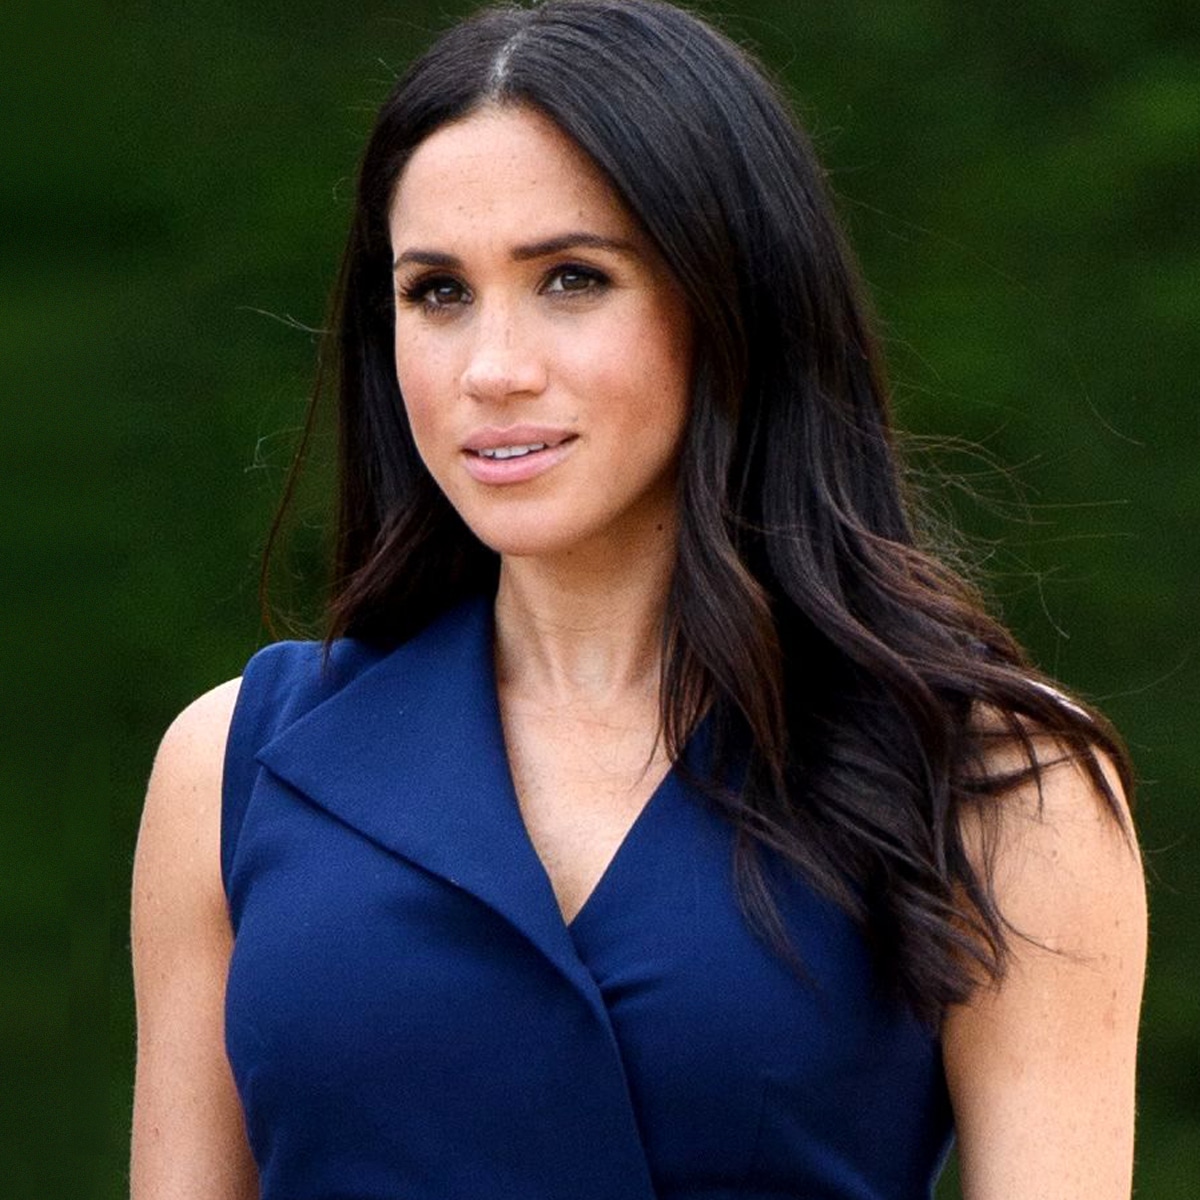 How Meghan Markle Has Forever Changed the Royal Family